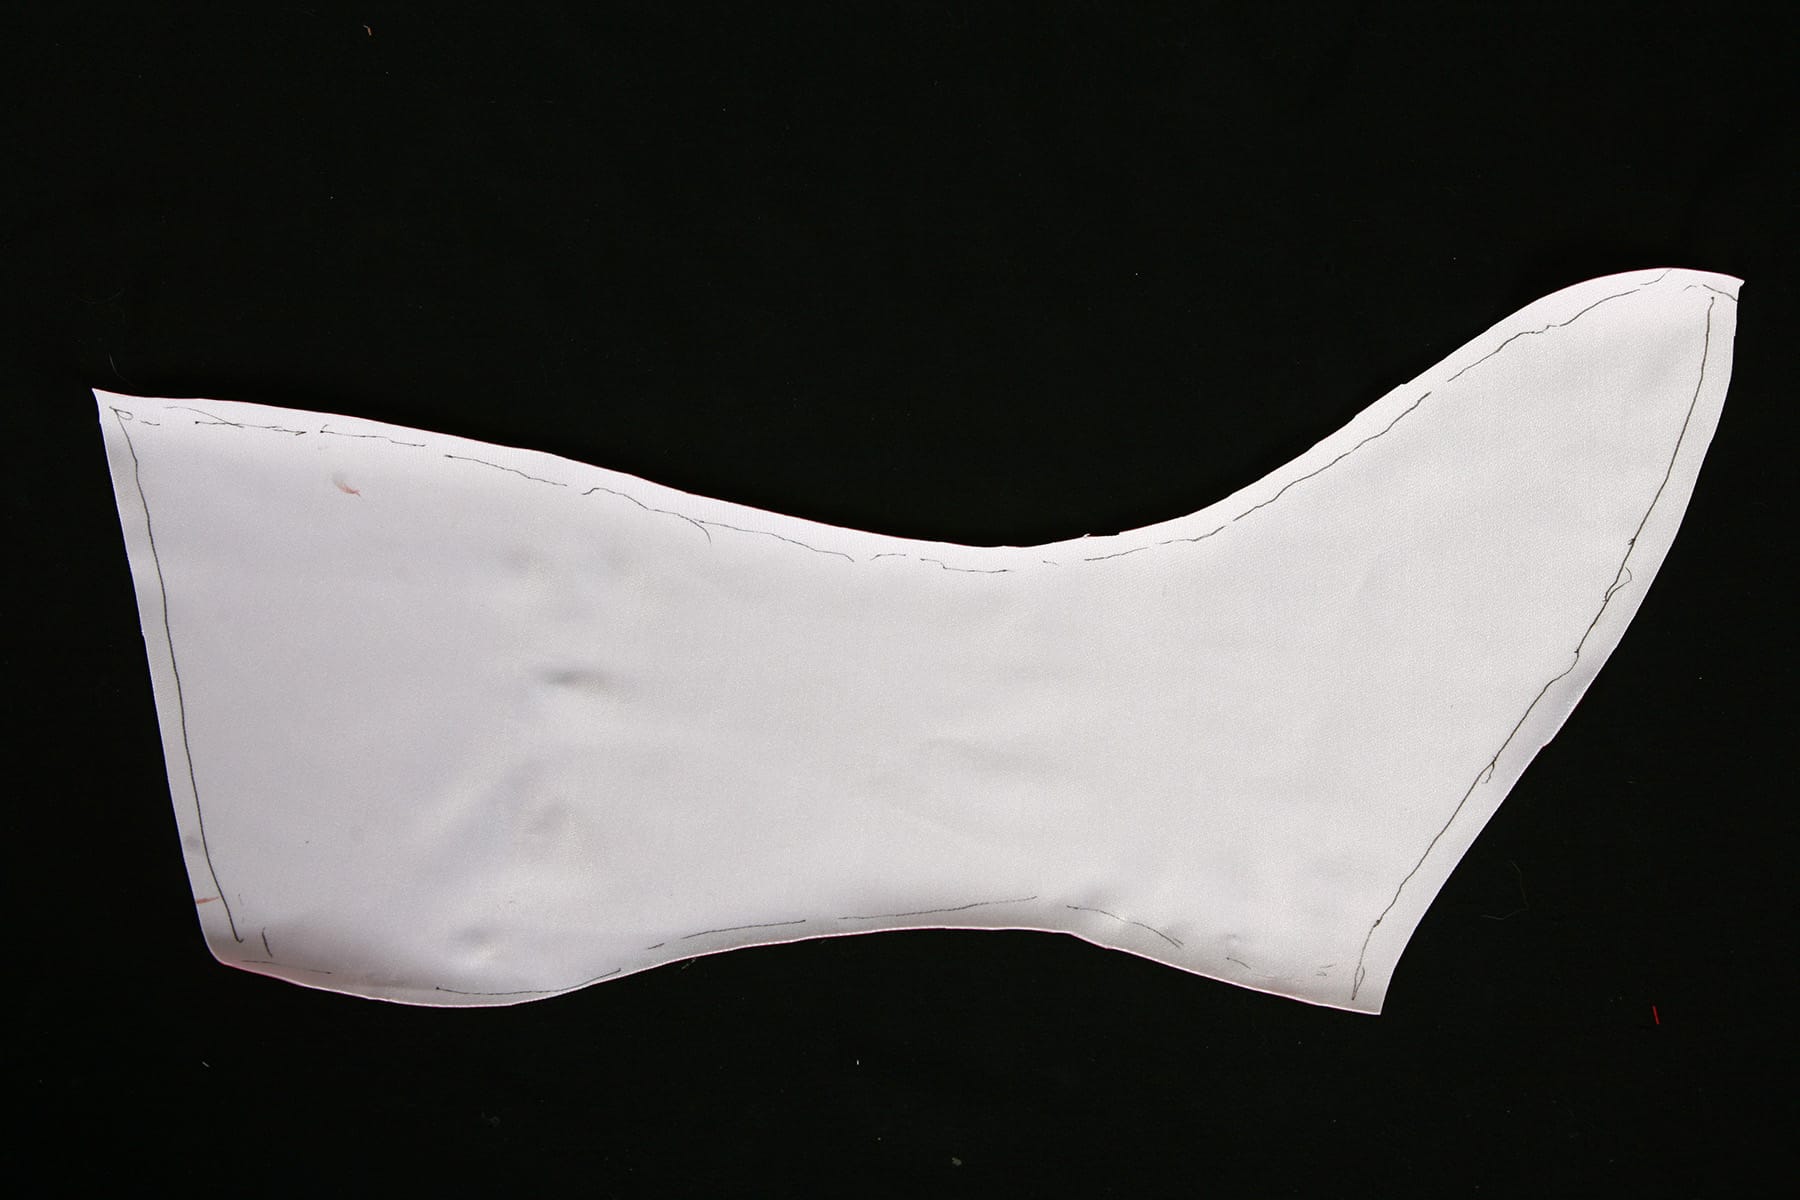 White fabric in the shape of a boot cover, against a black background.